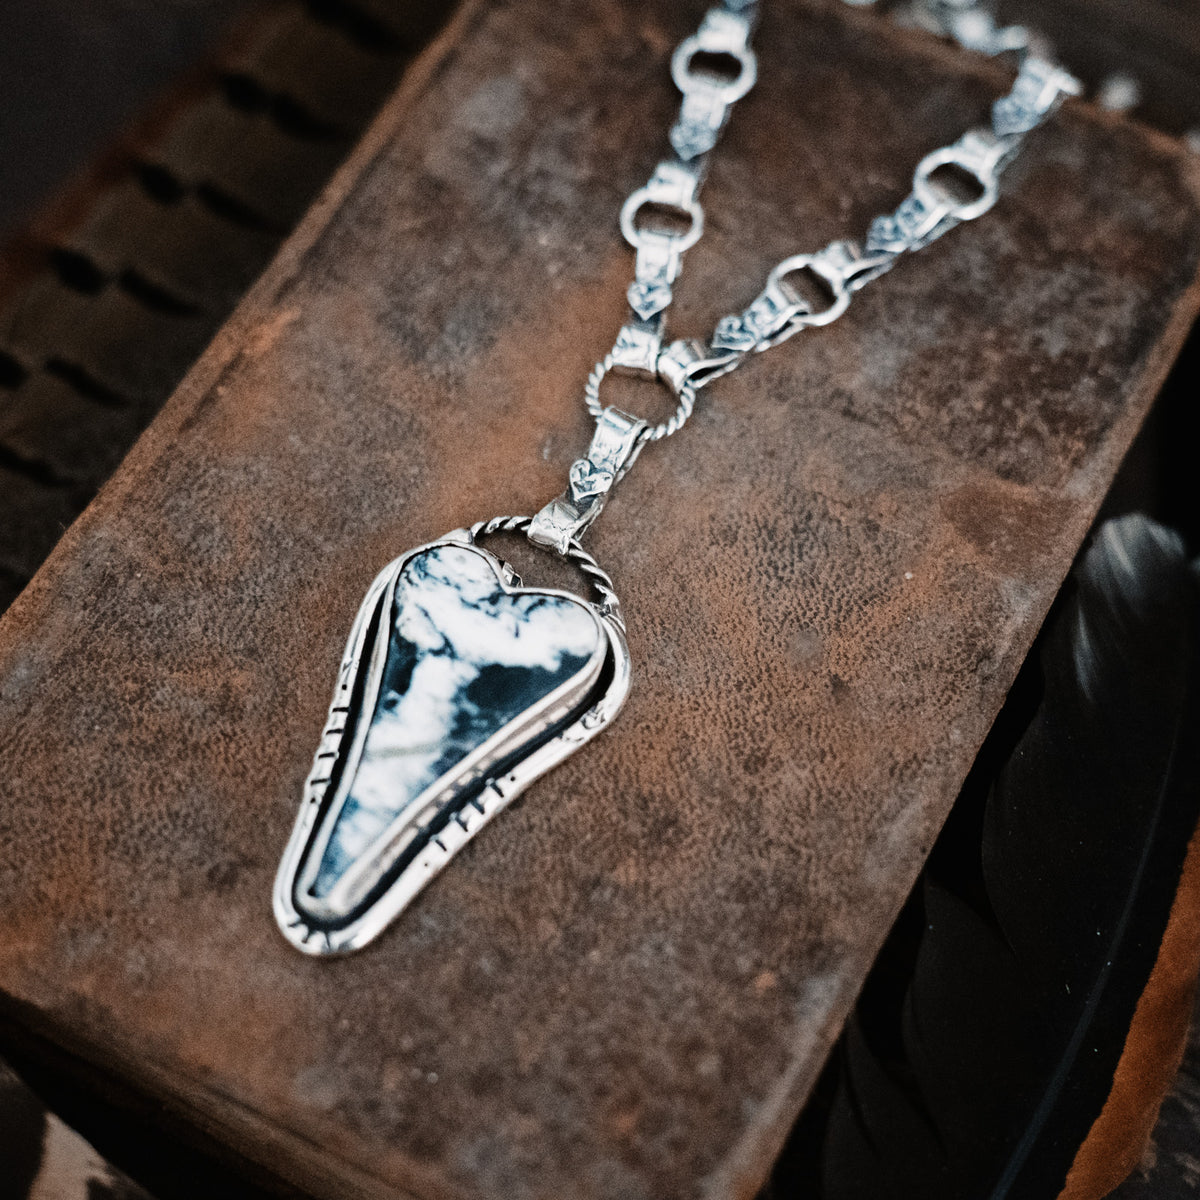 Honor Your Heart White Buffalo Necklace